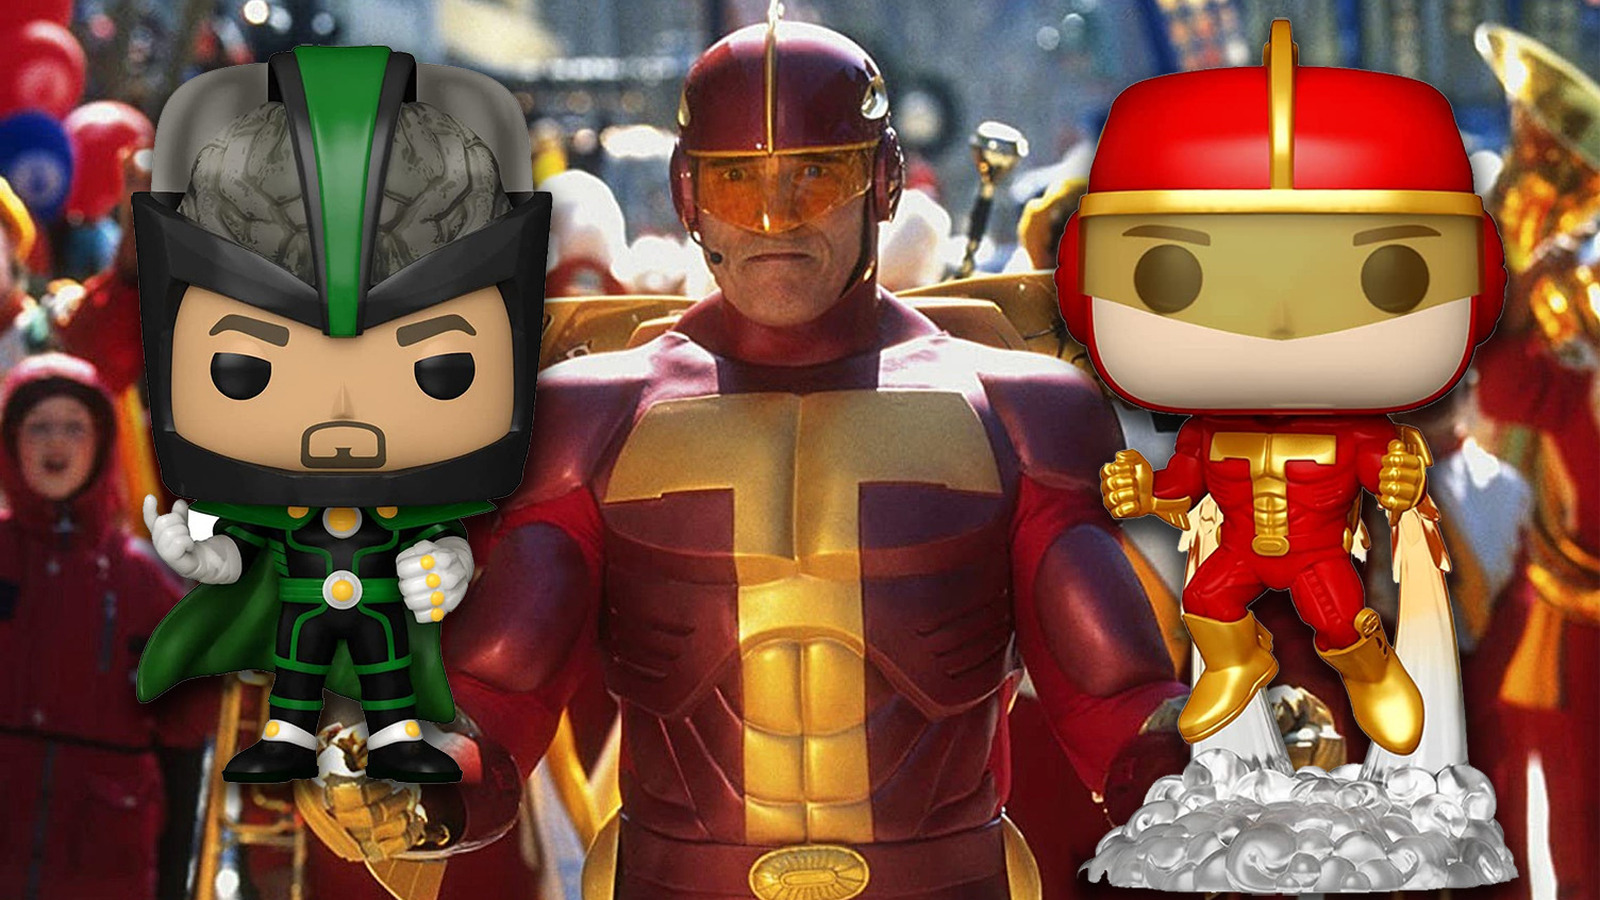 Jingle All The Way Turbo Man Funko Action Figure Is In Stock